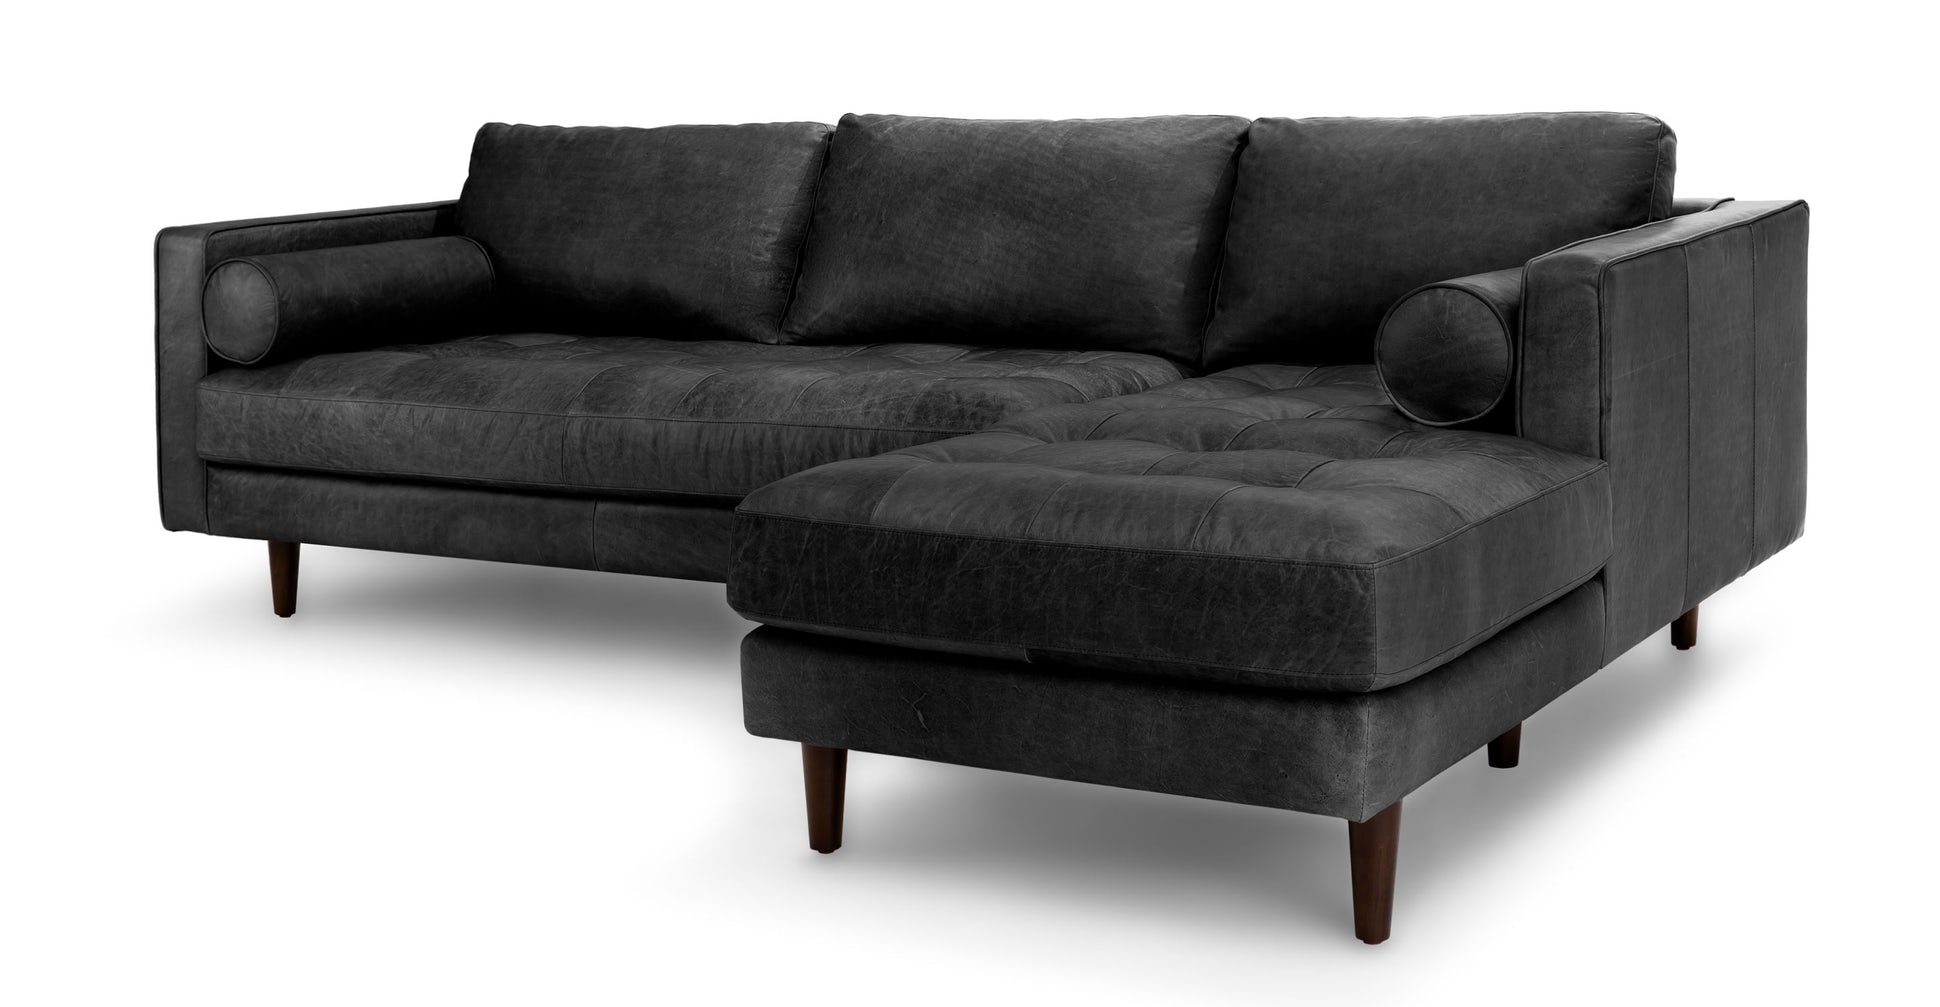 Sven Oxford Black Right Sectional Sofa - Image 1